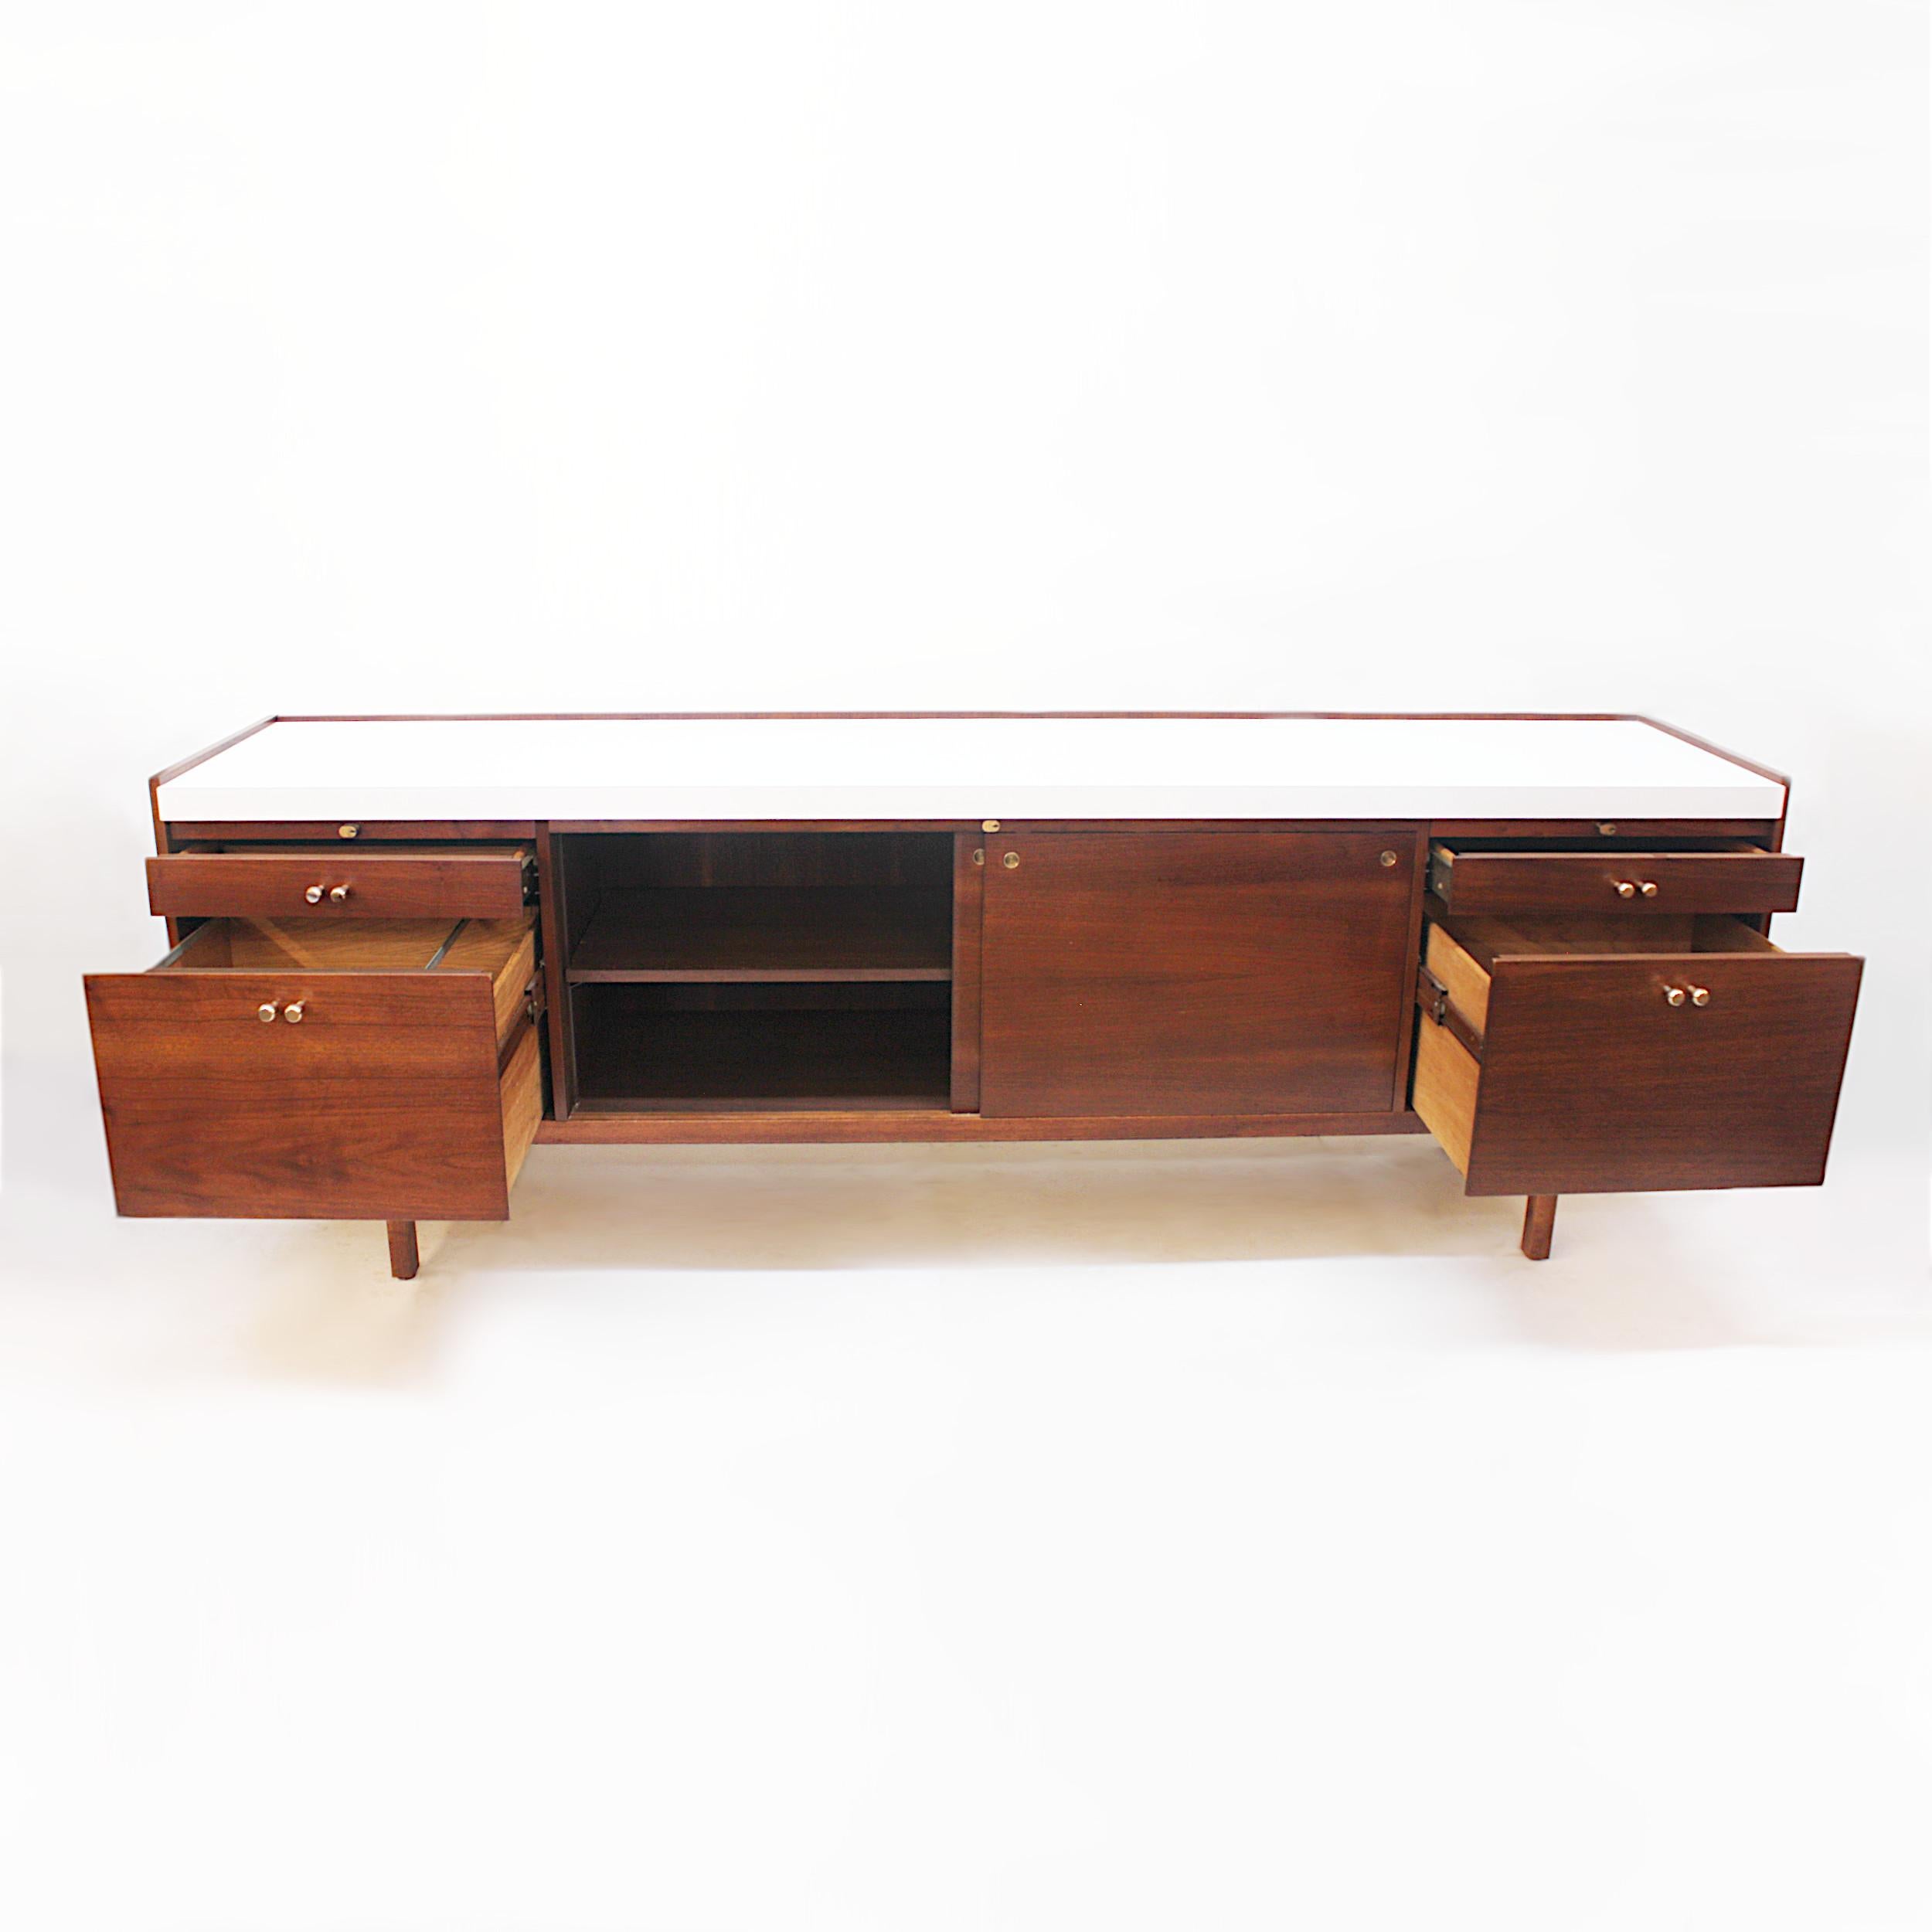 Plated 1960s Mid-Century Modern Walnut Executive Credenza by Charles Deaton for Leopold